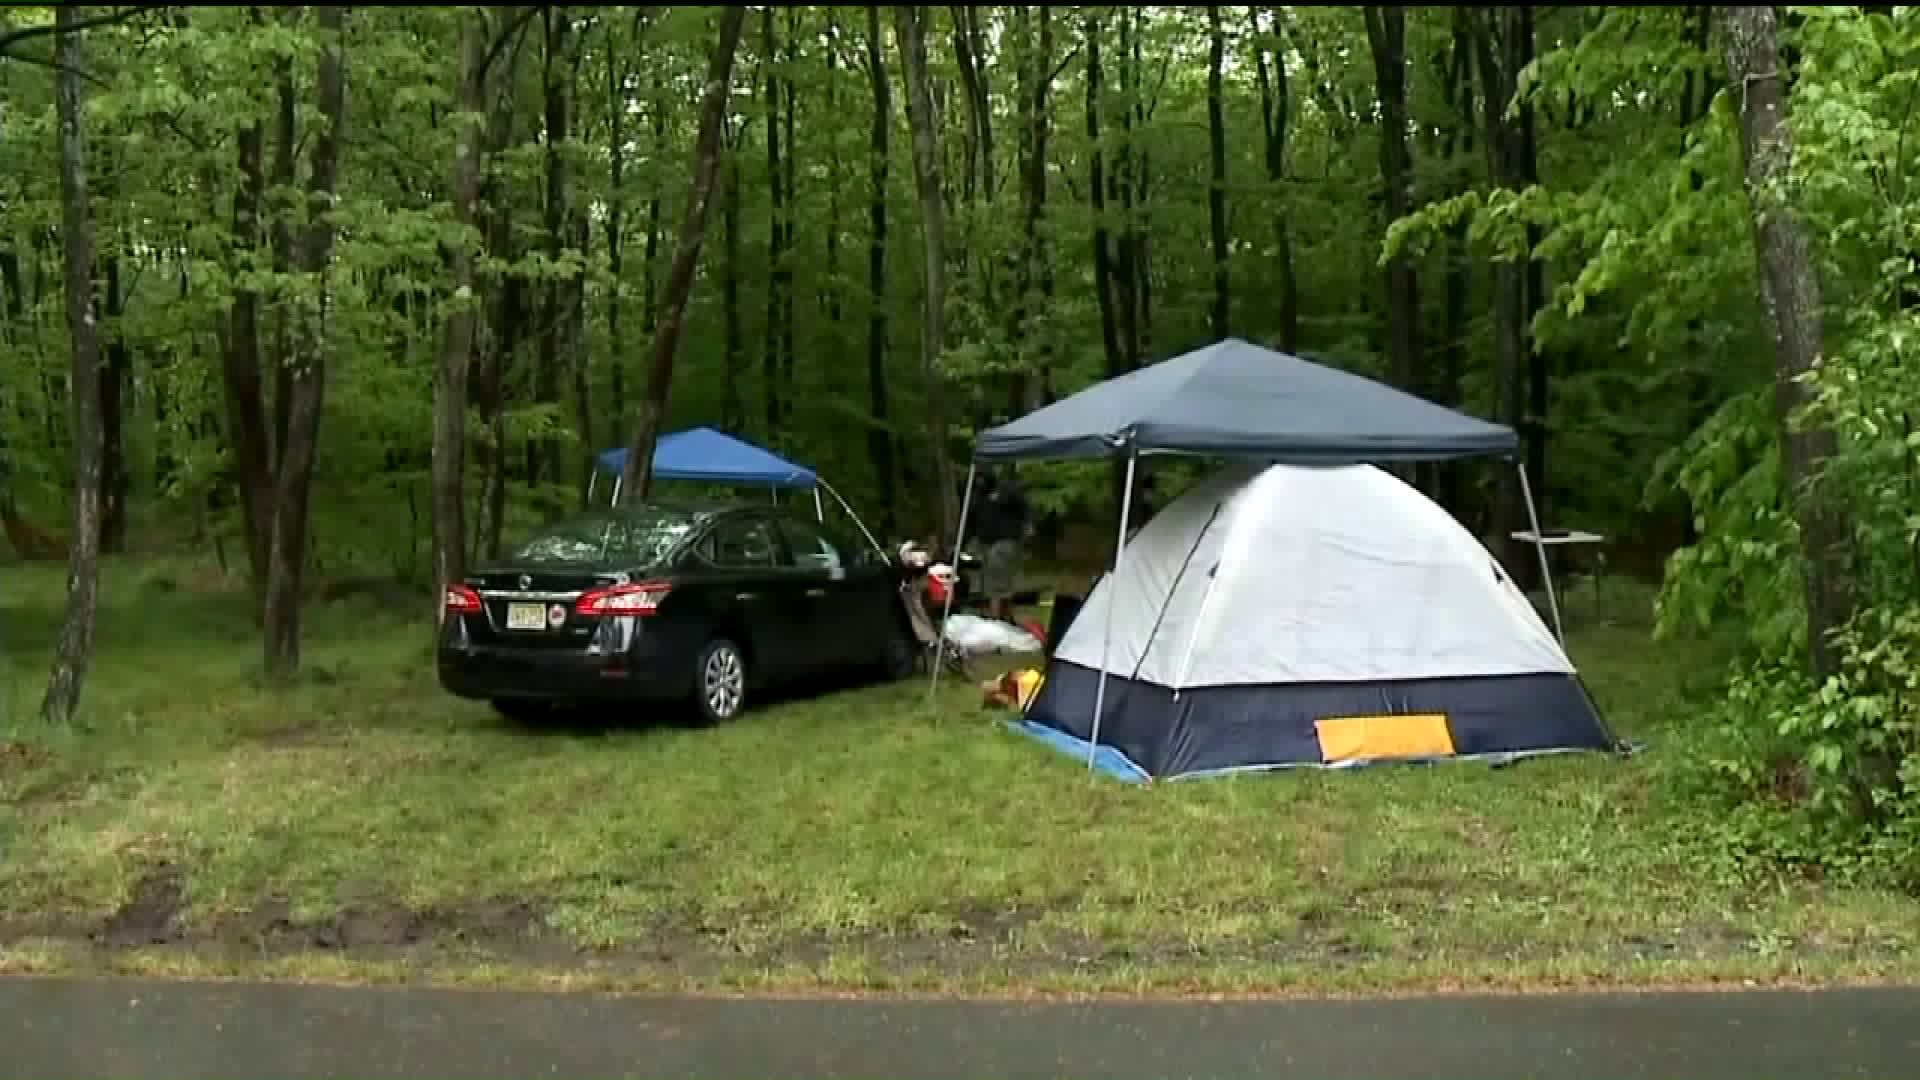 Rainy Weather No Match for People in the Poconos